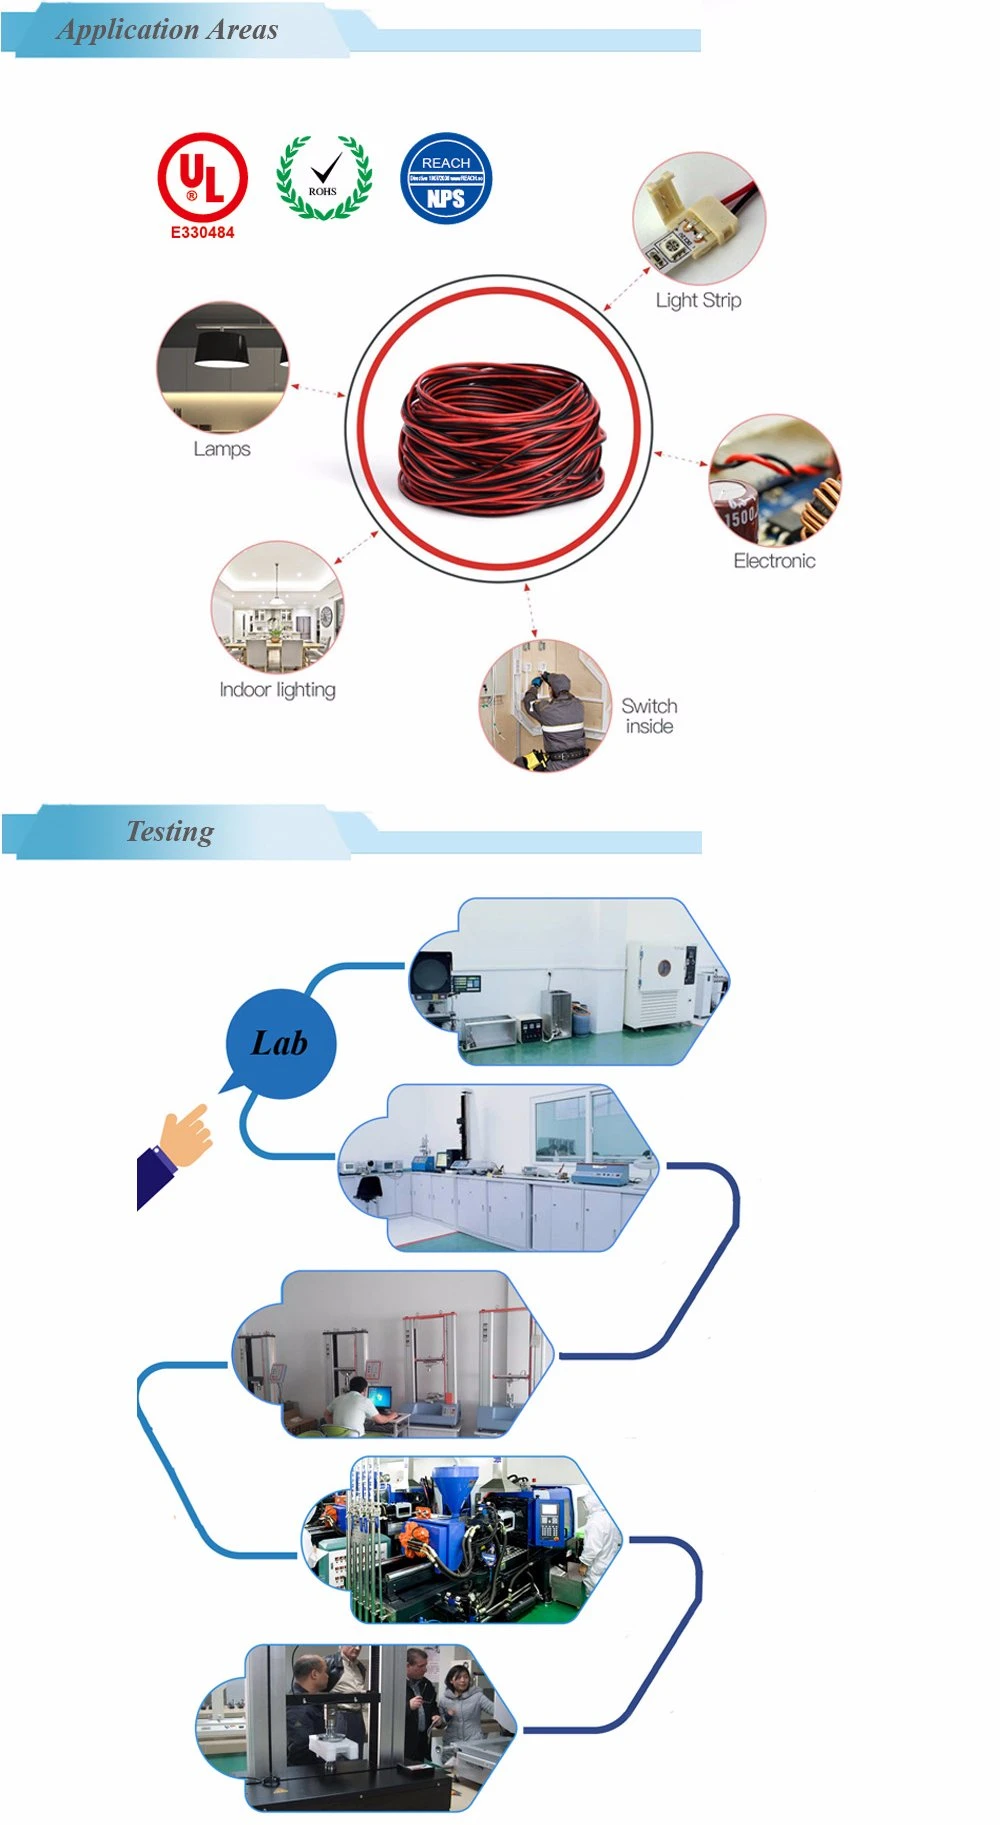 Lighting Connection Line High Voltage Resistant 1000V Distribution Box Connection Line UL1032 Electronic Wire